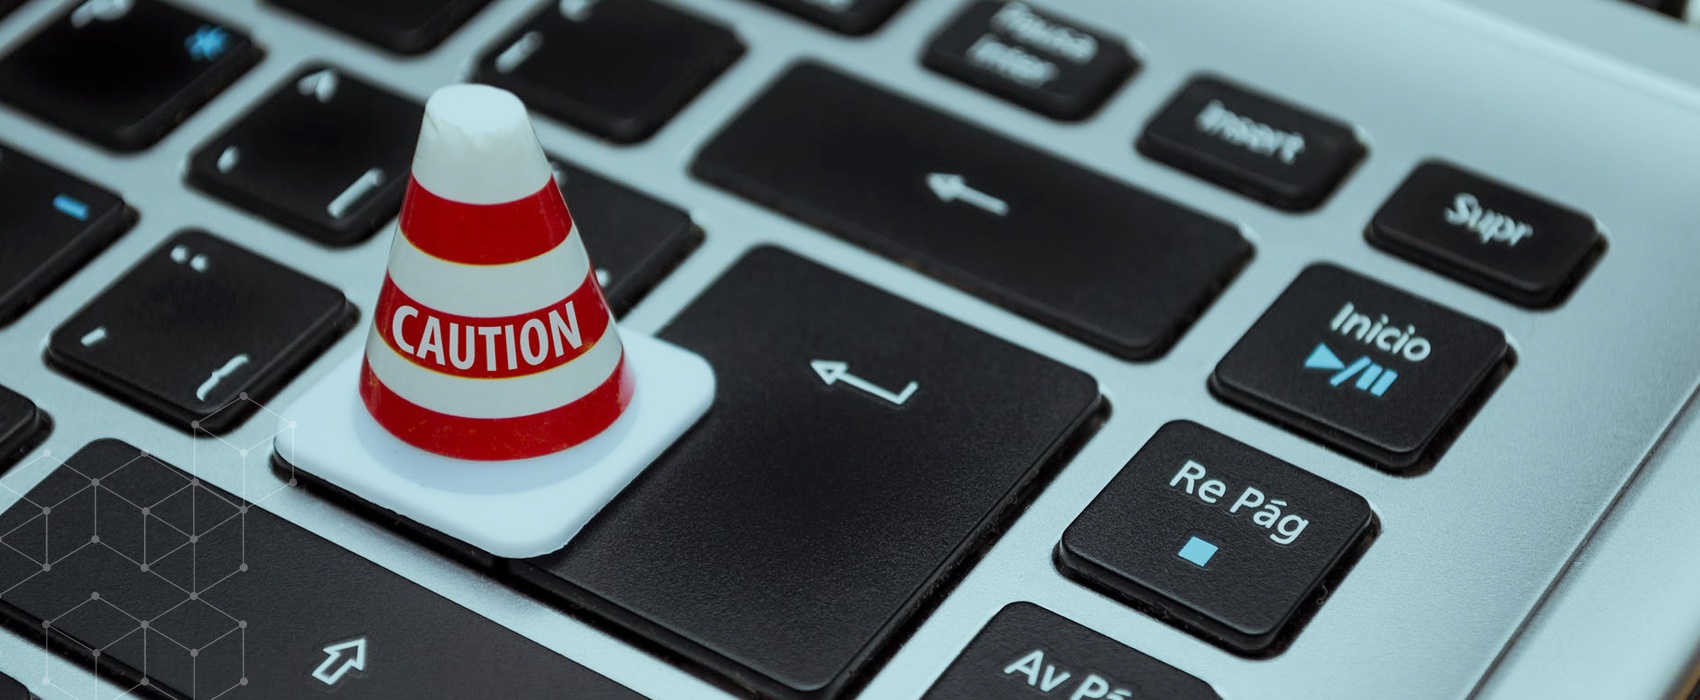 "Caution" cone resting on keyboard